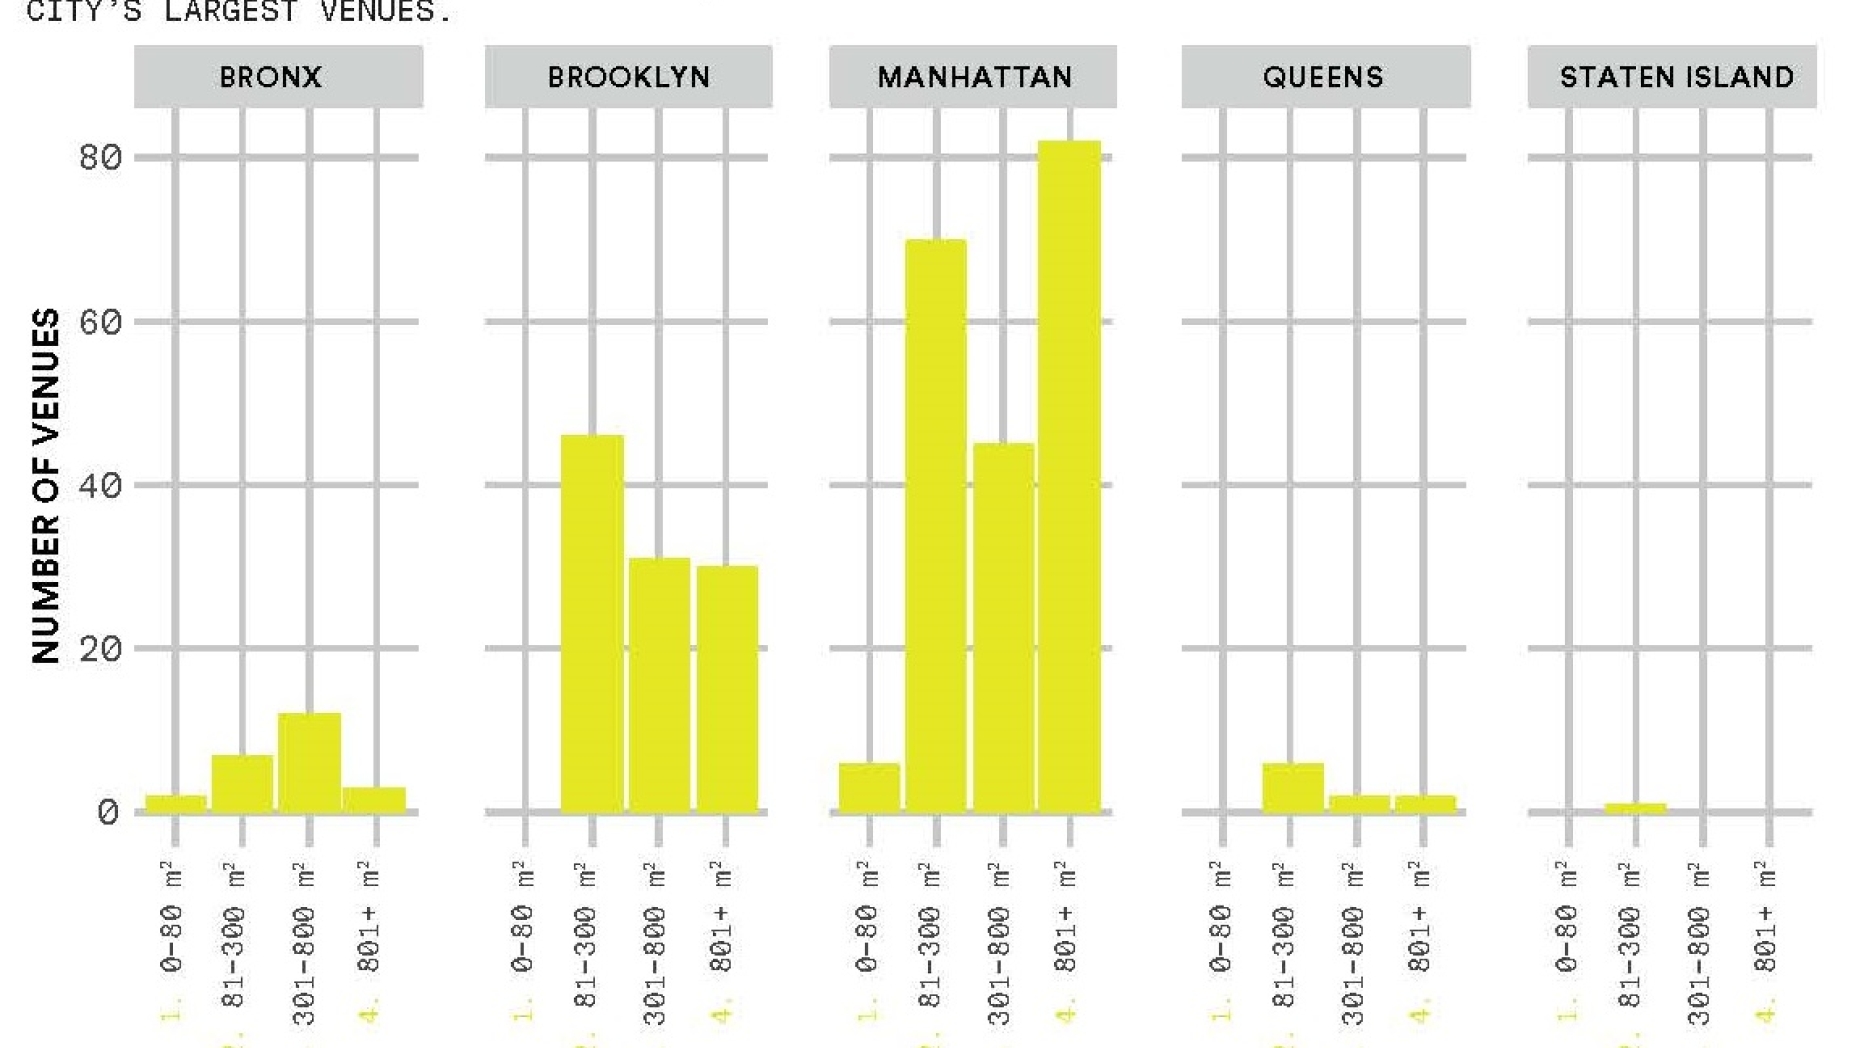 Bar chart showing number of venues by size and borough. Manhattan has the most and the largest with Brooklyn being clear second